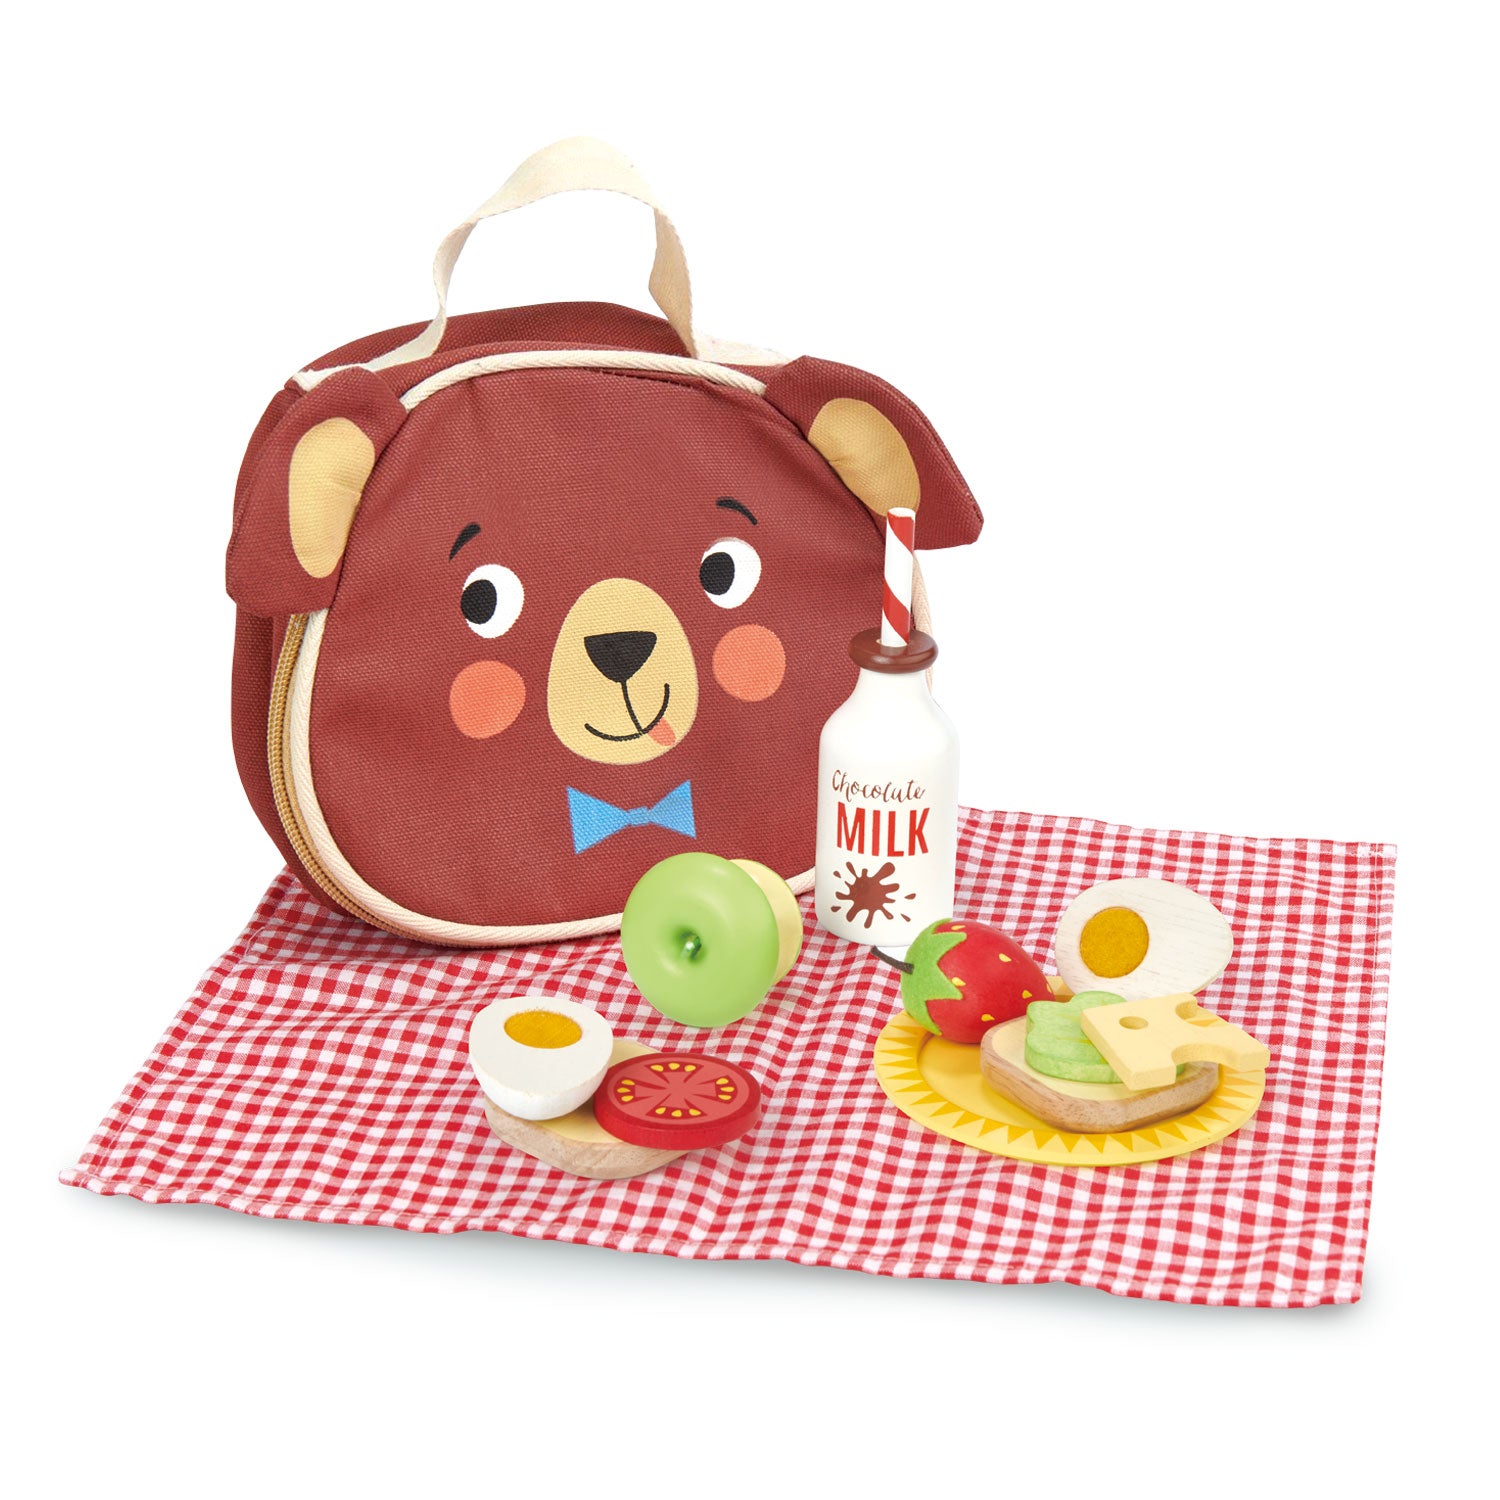 <p>A sweet little Bear picnic bag containing fun snack food to take your friends on a picnic!</p>
<p>Contents include, A cotton bag printed with our own friendly bear, a red gingham tablecloth, a chocolate milk drink, a sunshine plate, 2 slices of bread to make a sandwich with a tomato, cheese slice, and lettuce. A boiled egg, a strawberry, and an apple....er, who&#39;s eaten the apple?</p>
<p>Age range: 3 Years And Older  </p>
<p> Product size: 7.28 x 3.35 x 6.1”  </p>
<p> Weight: 0.68 lbs</p>
